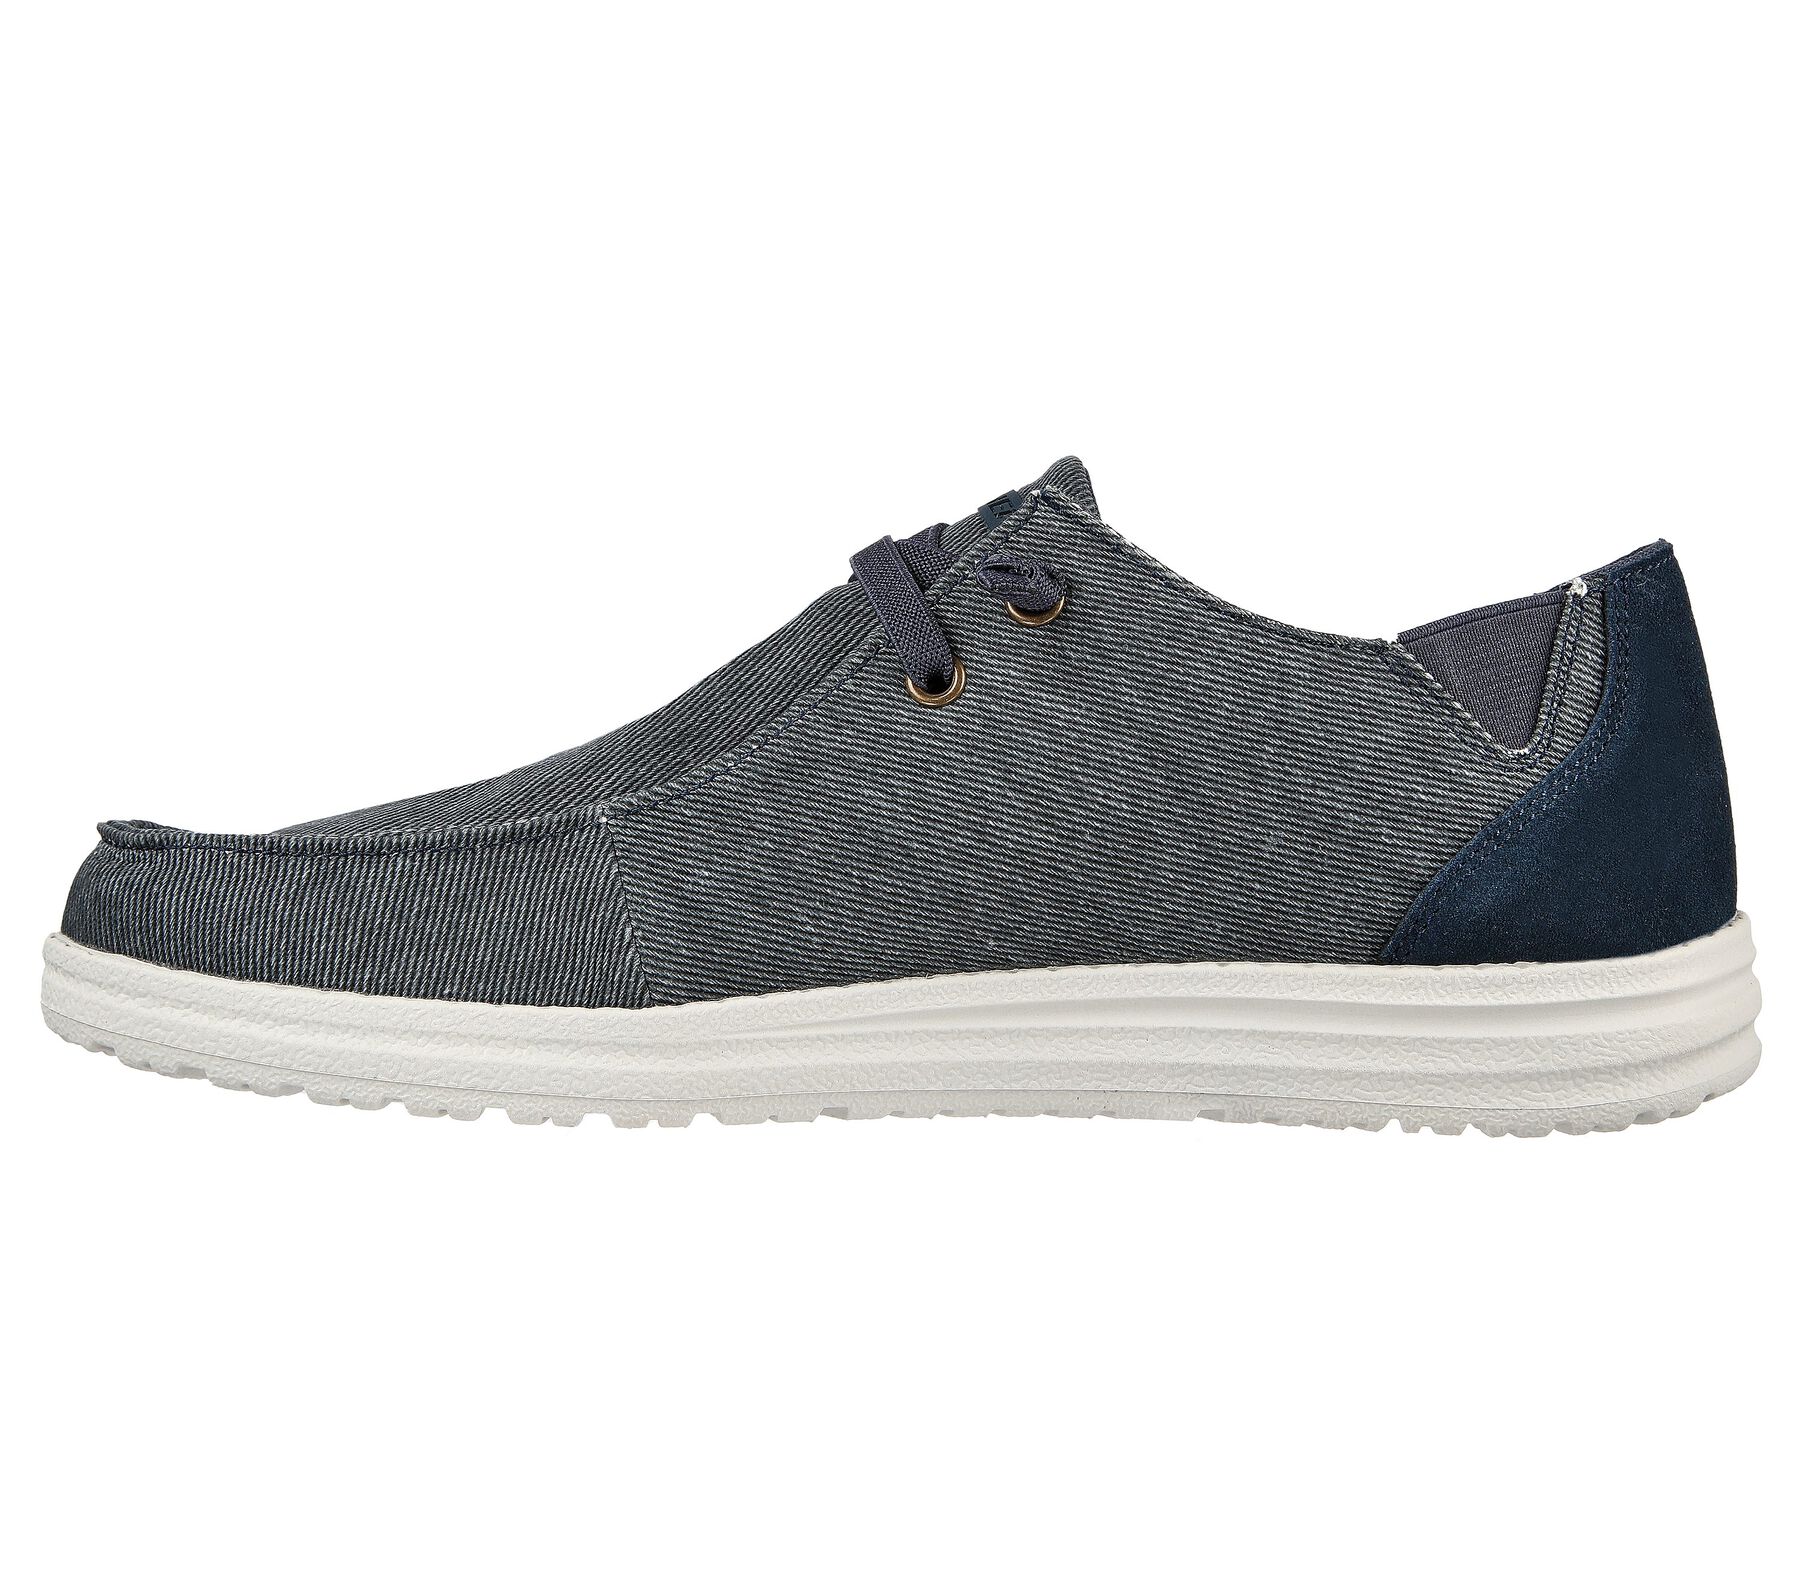 Shop the Melson - Raymon | SKECHERS CA